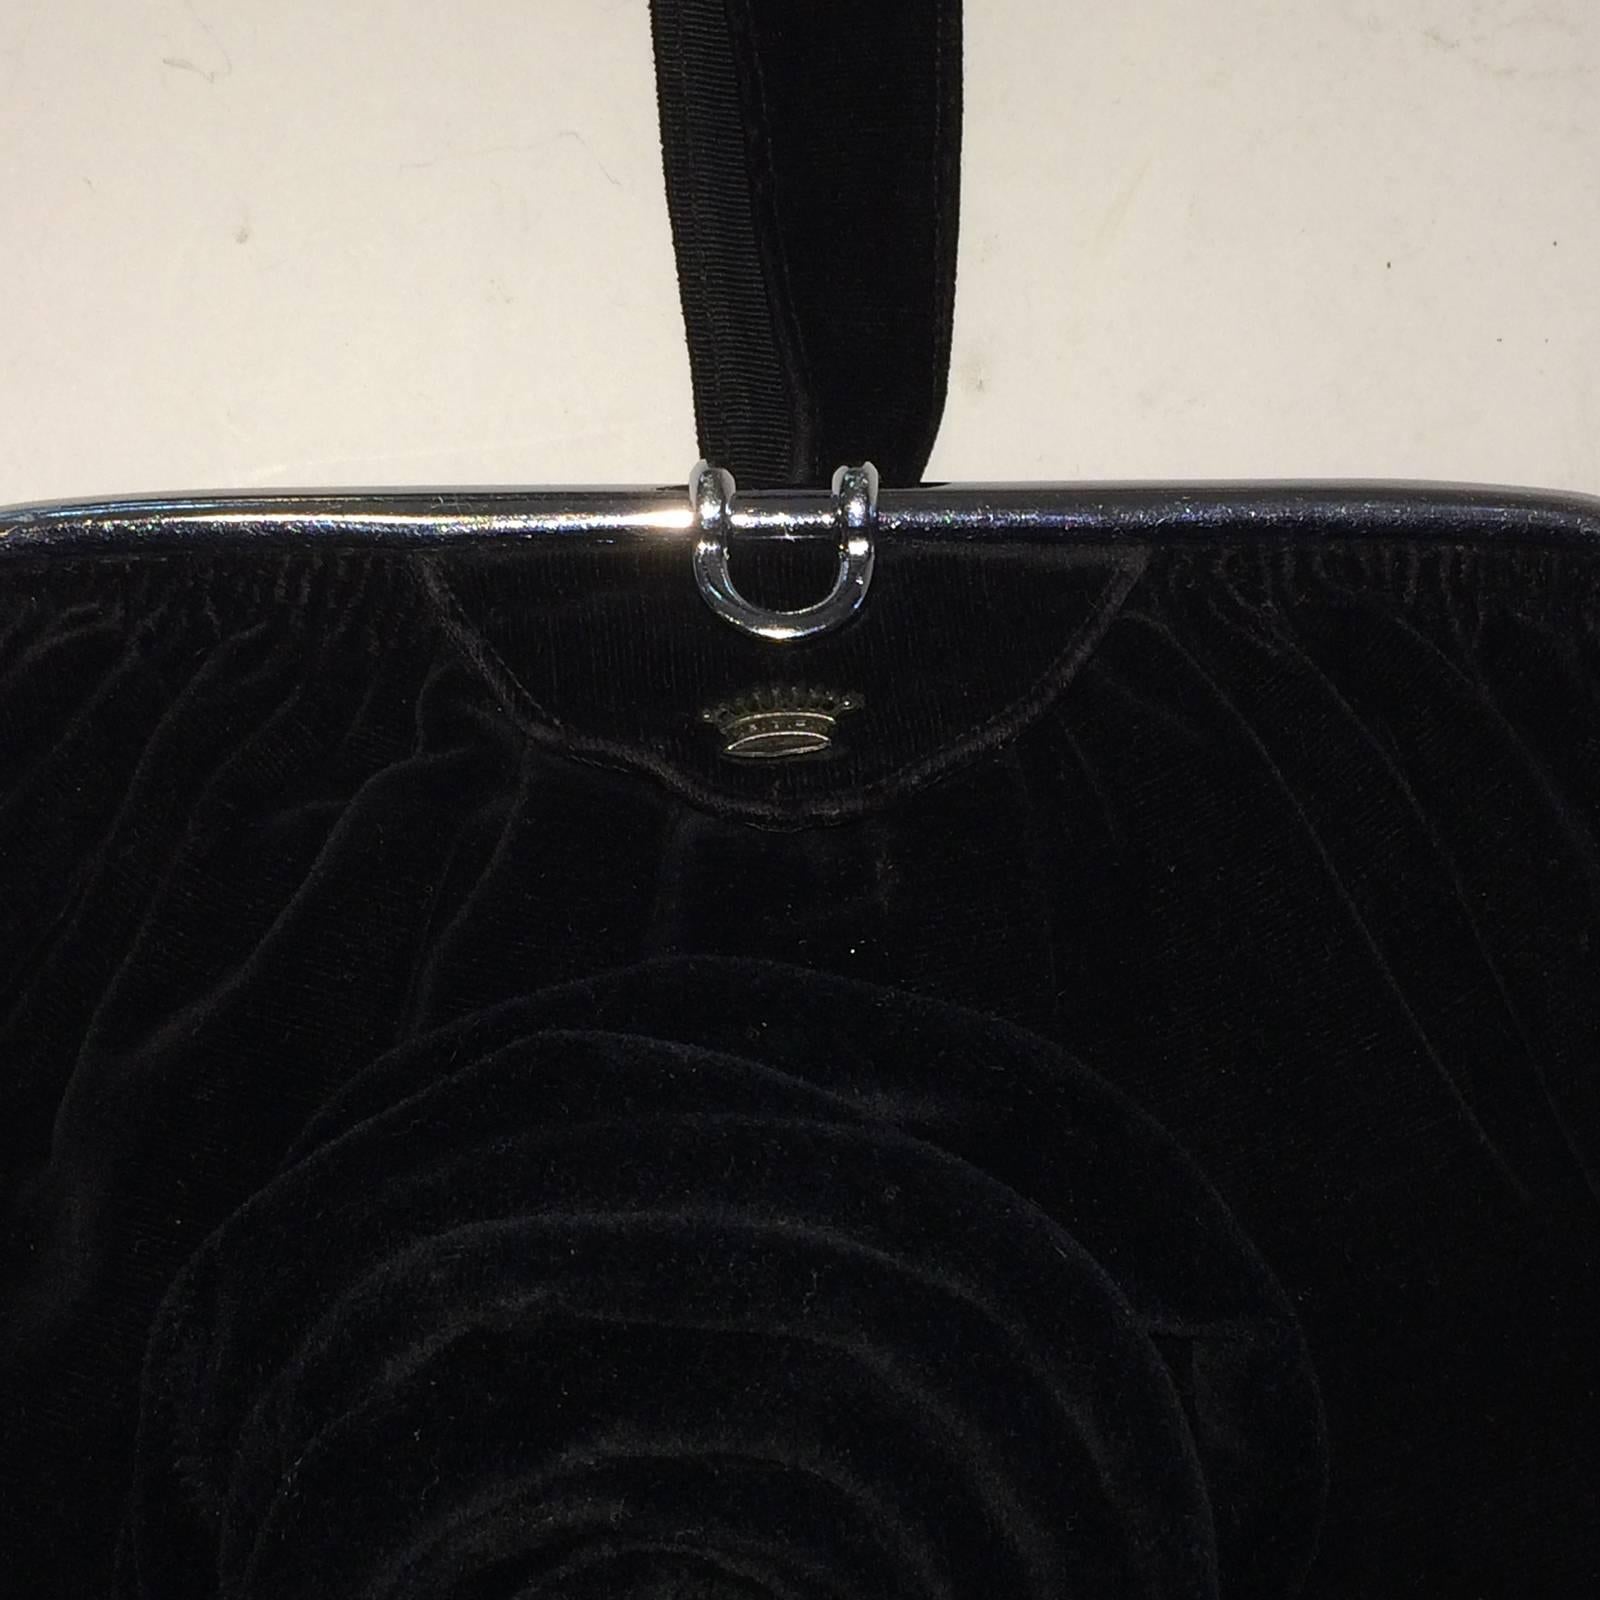 Art Deco Black Velvet Evening Bag with Rose made of Velvet to front, below Manufacturers Insignia of a Silver Metal Crown above. The Chrome Frame along top, has a rear hand grip for ease and security. The chrome has a snap, “roll-over” clasp, when